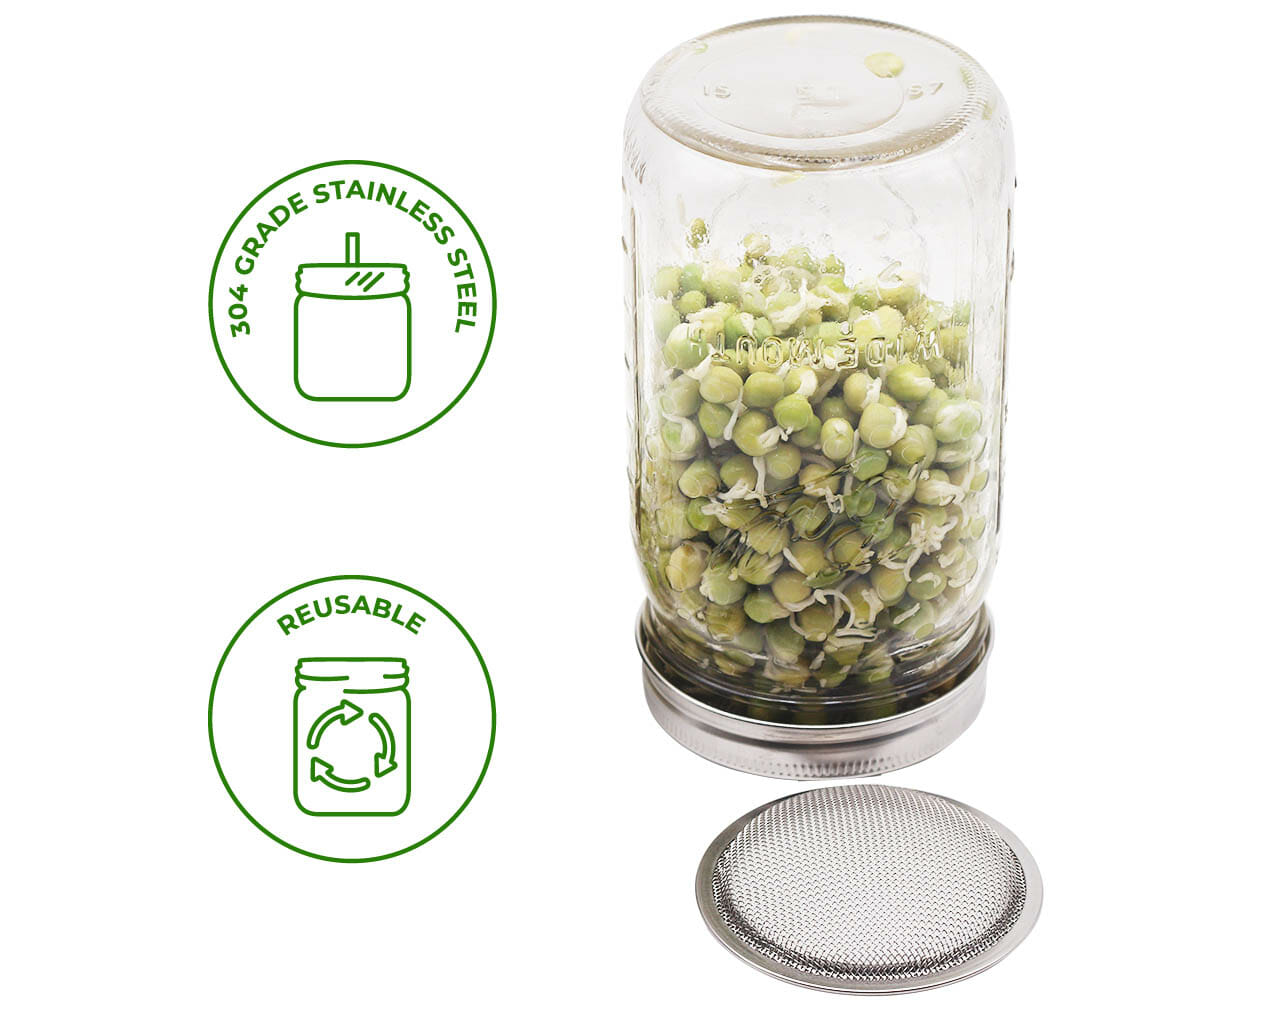 mason-jar-lifestyle-stainless-steel-mesh-sprouting-lid-band-wide-mouth-ball-32oz-quart-beans-peas-icons